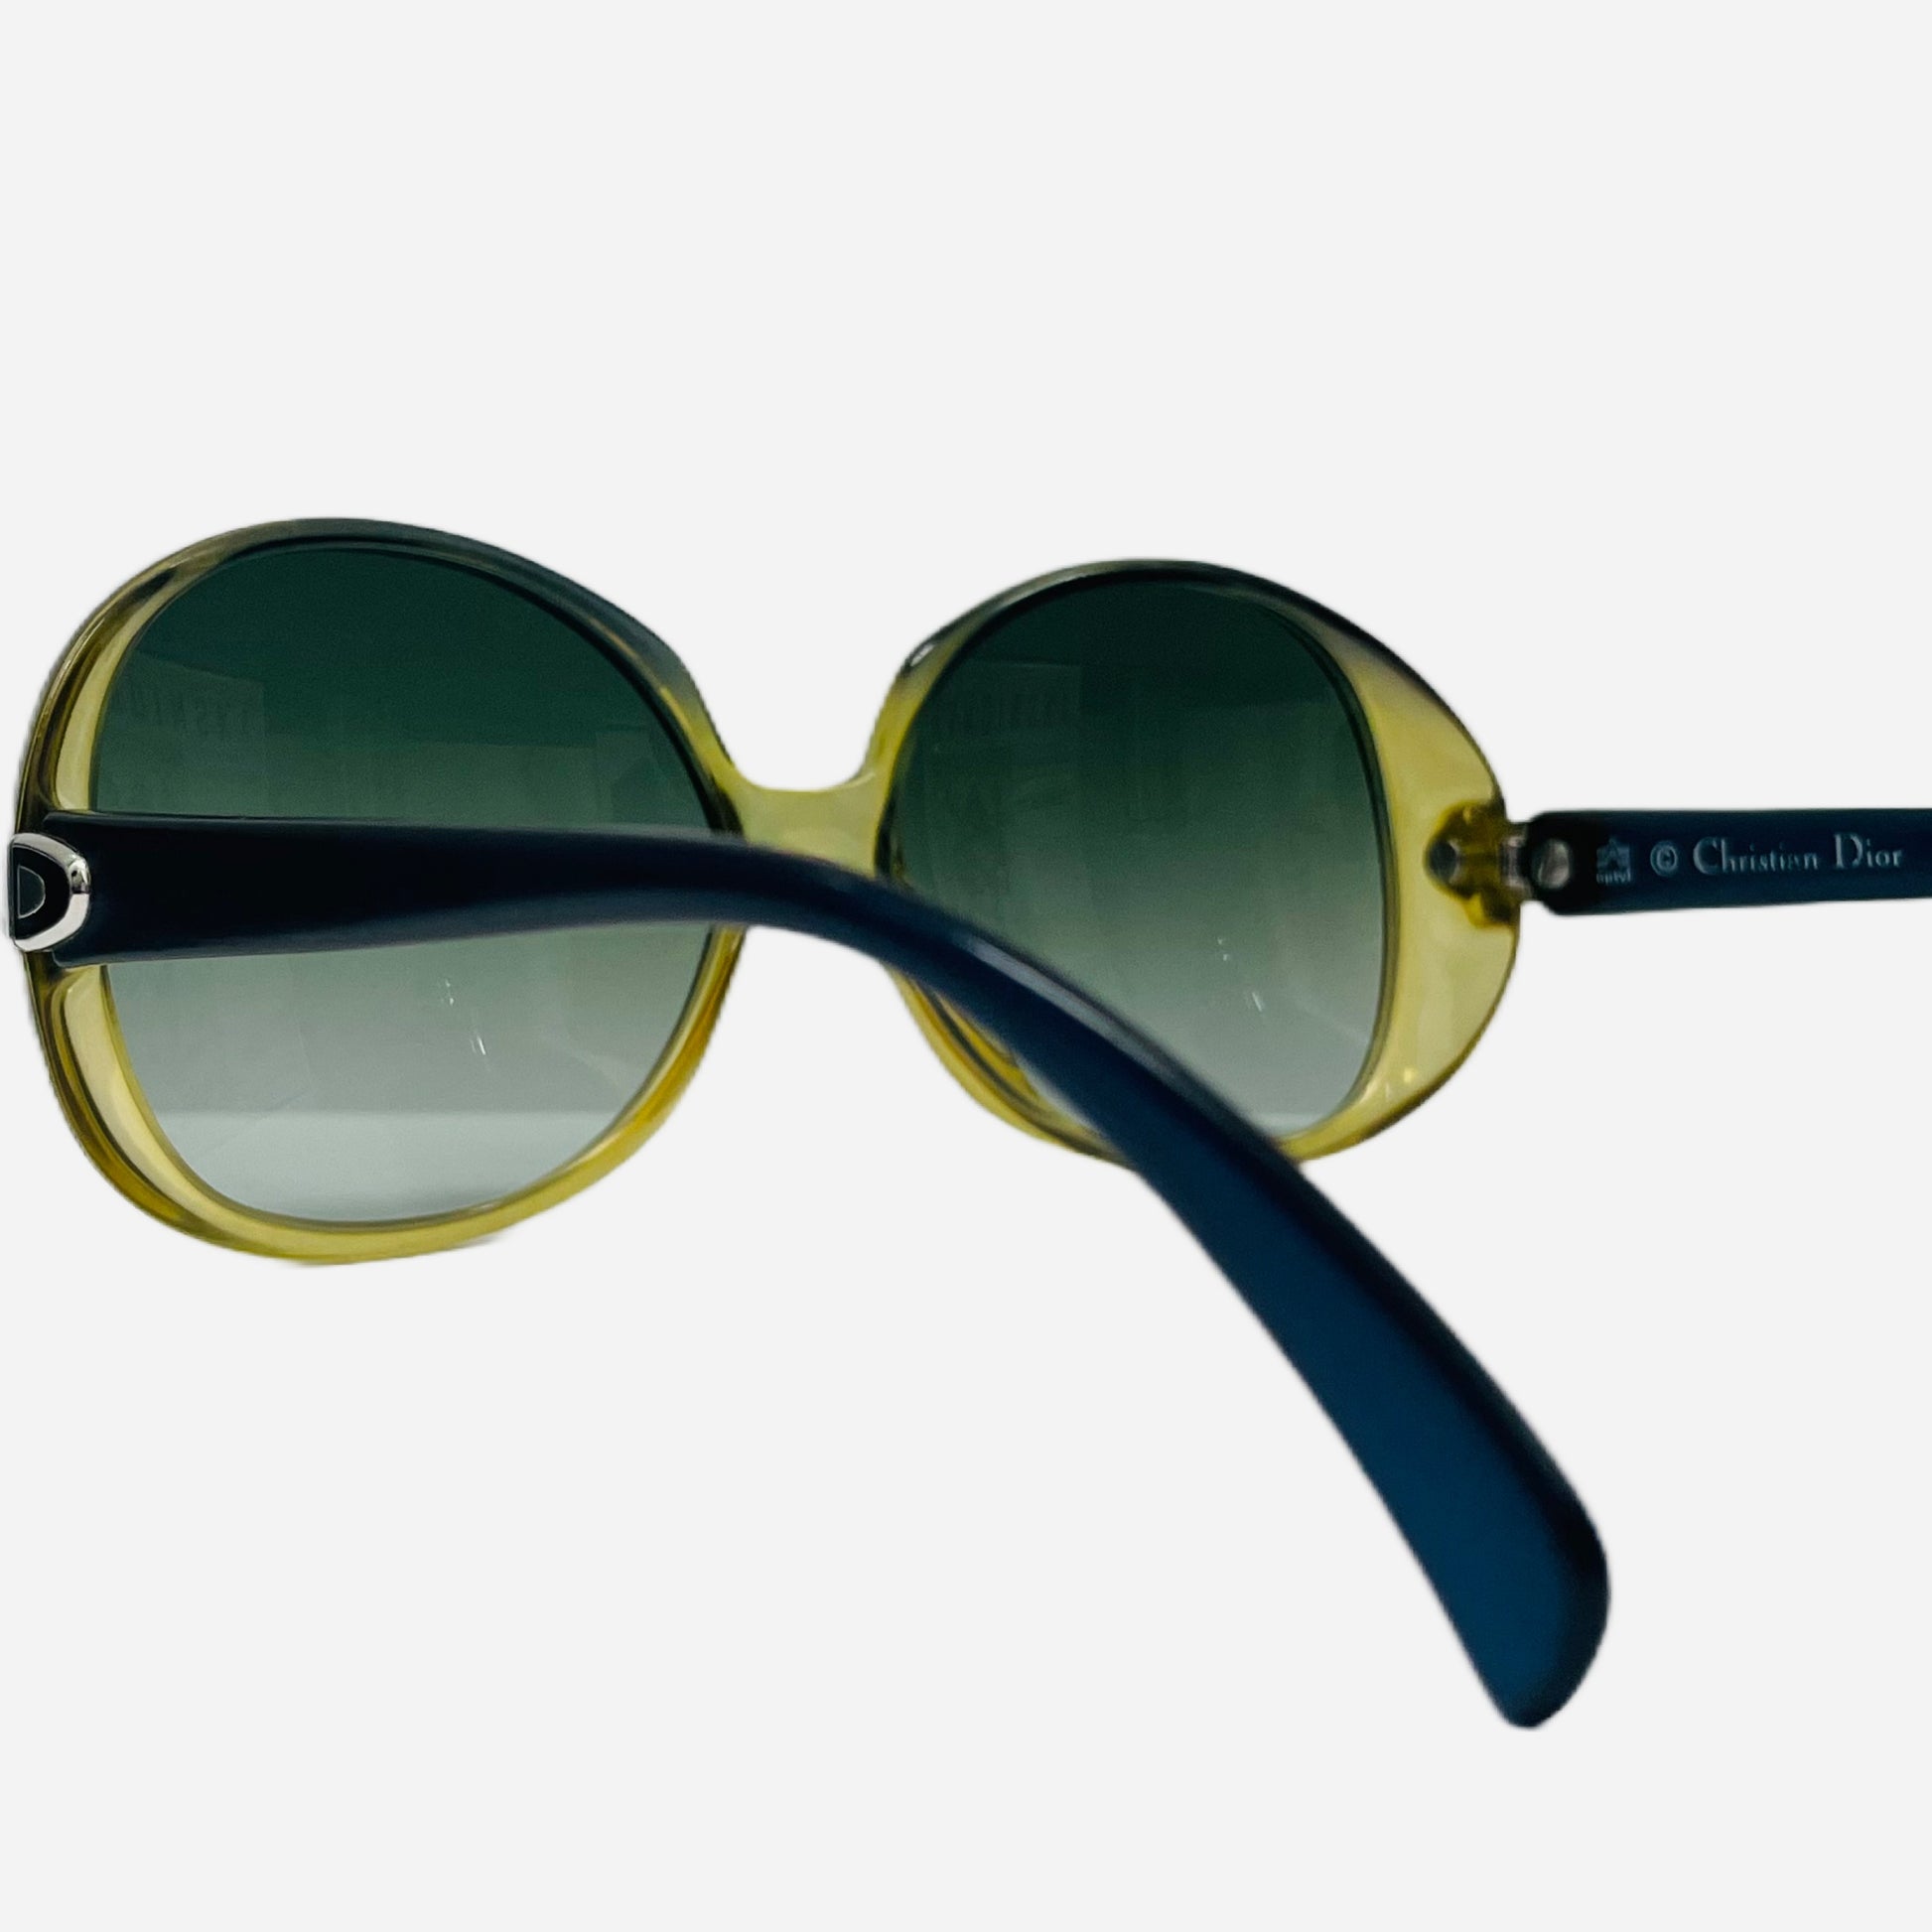 Vintage-Christian-Dior-Sonnenbrille-Sonnenbrille-2049-Optyl-the-seekers-back-side